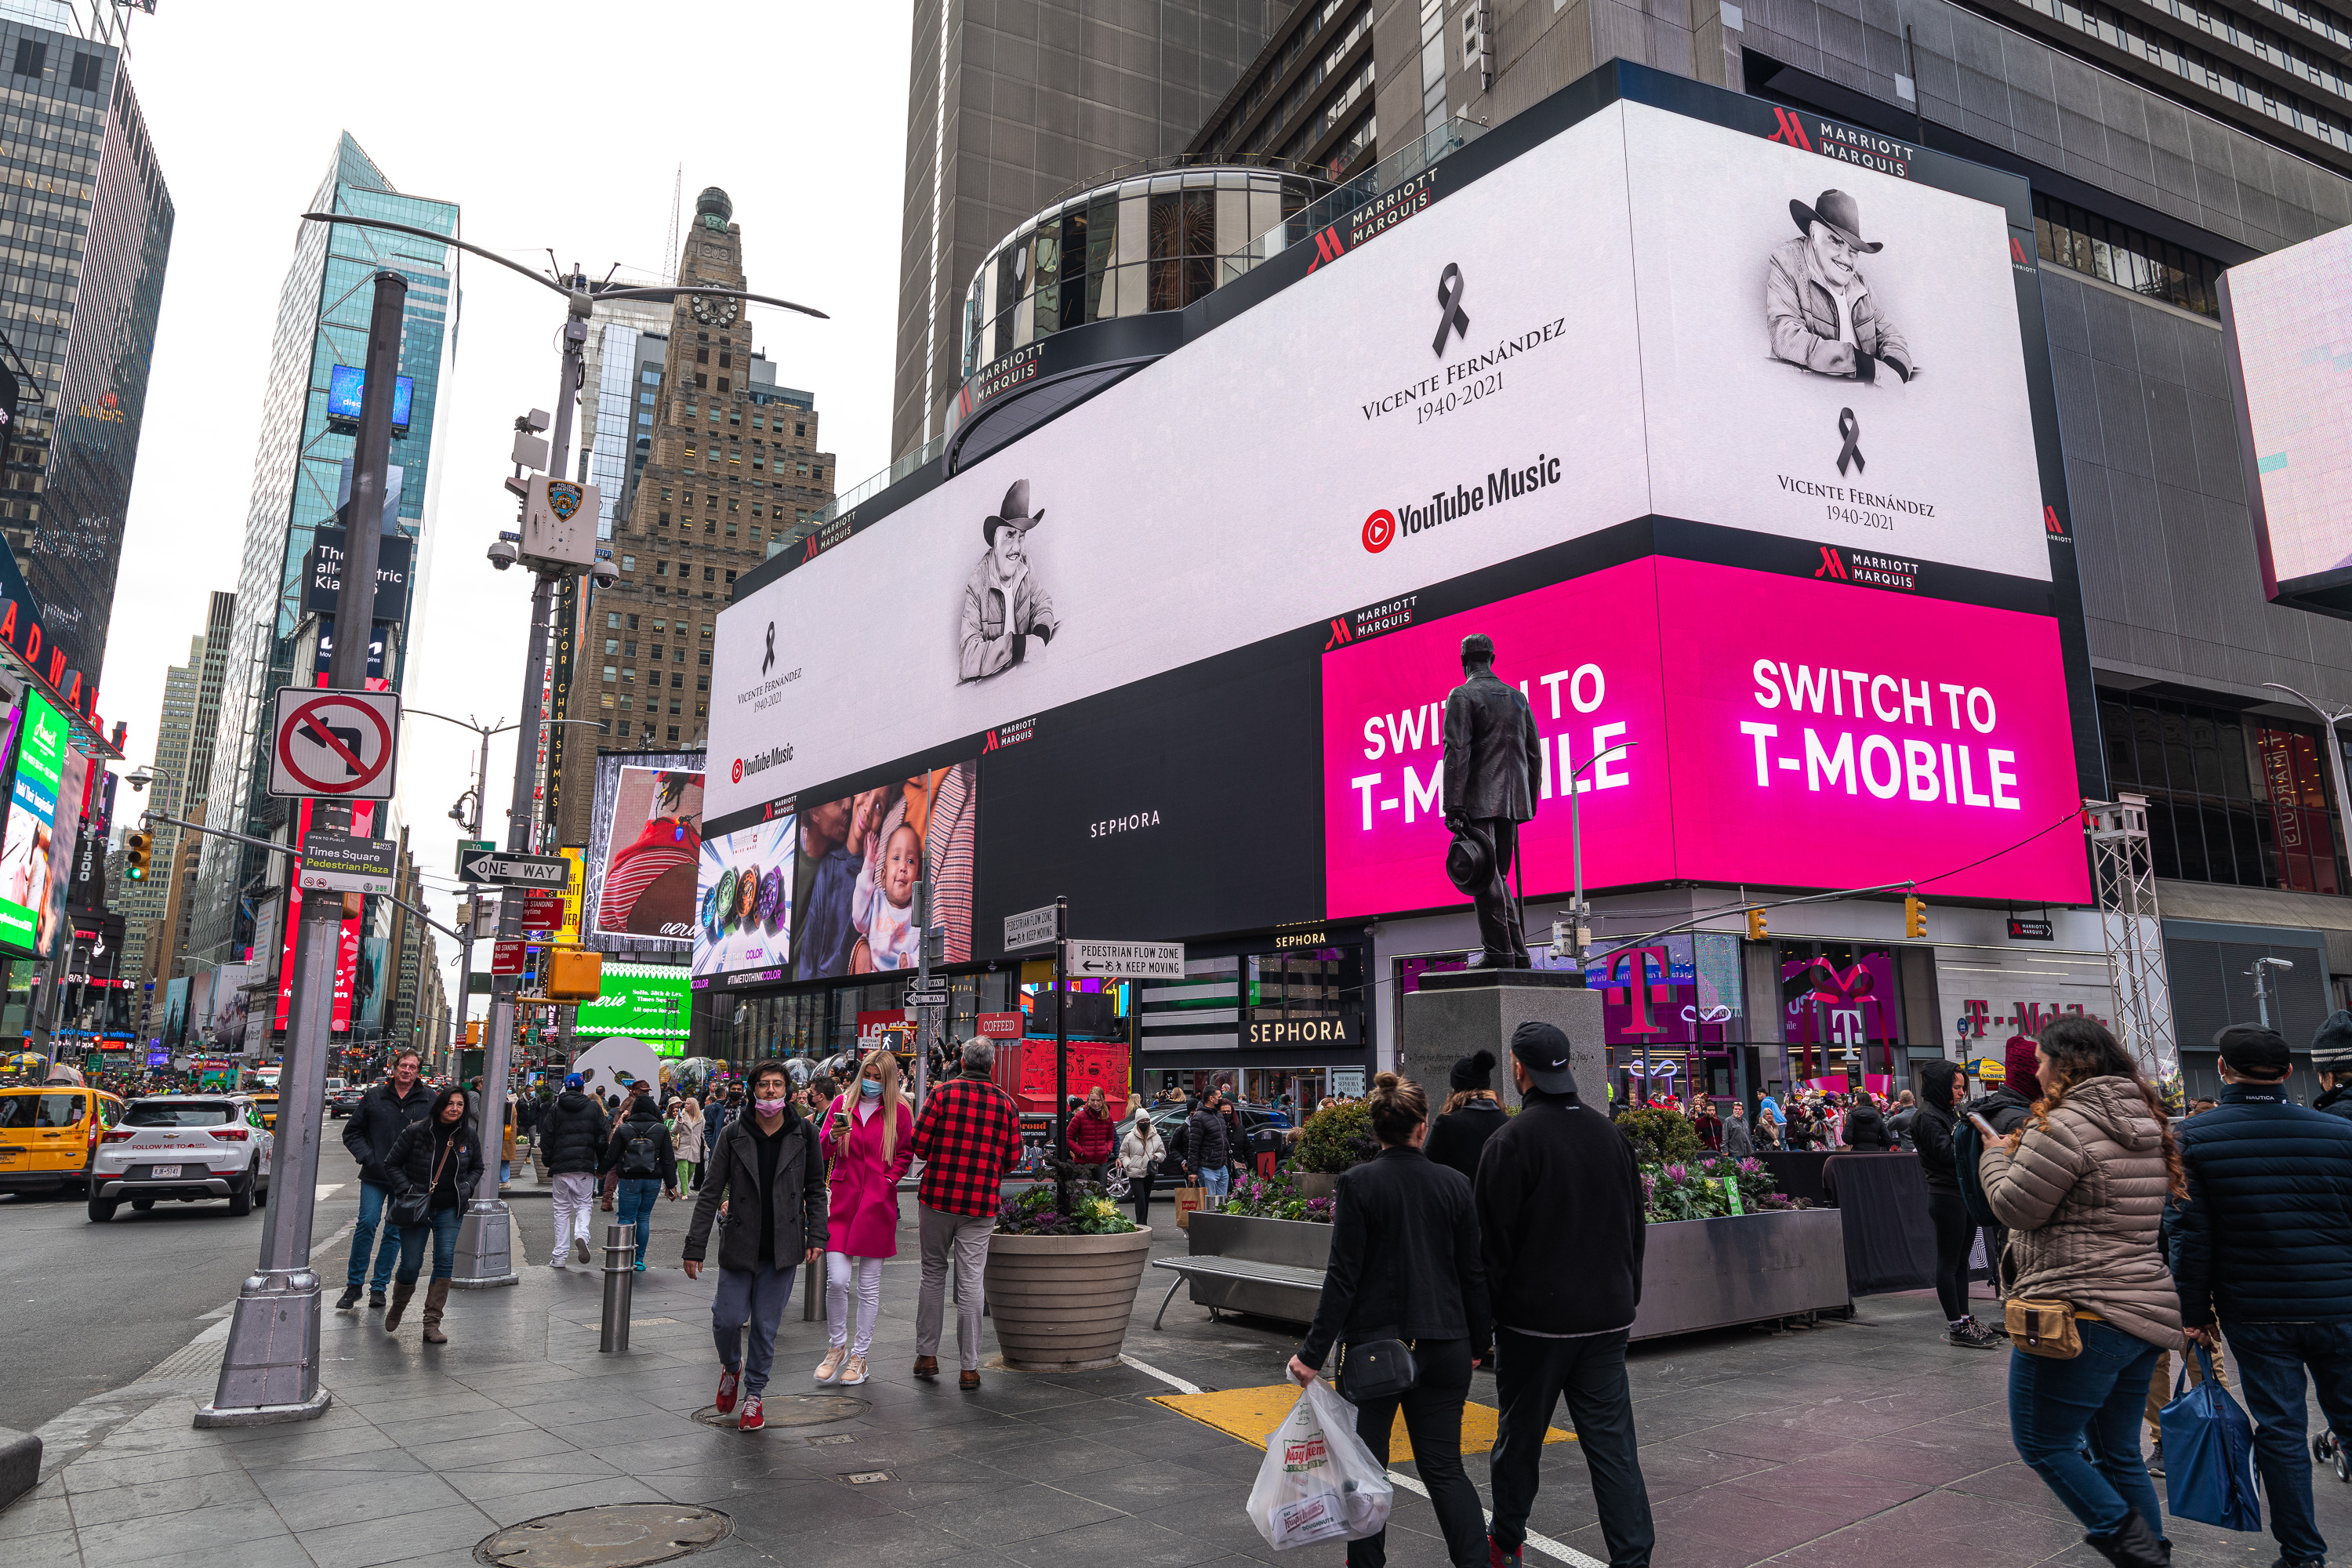 Vicente Fernández appears in Times Square in YouTube Music tribute